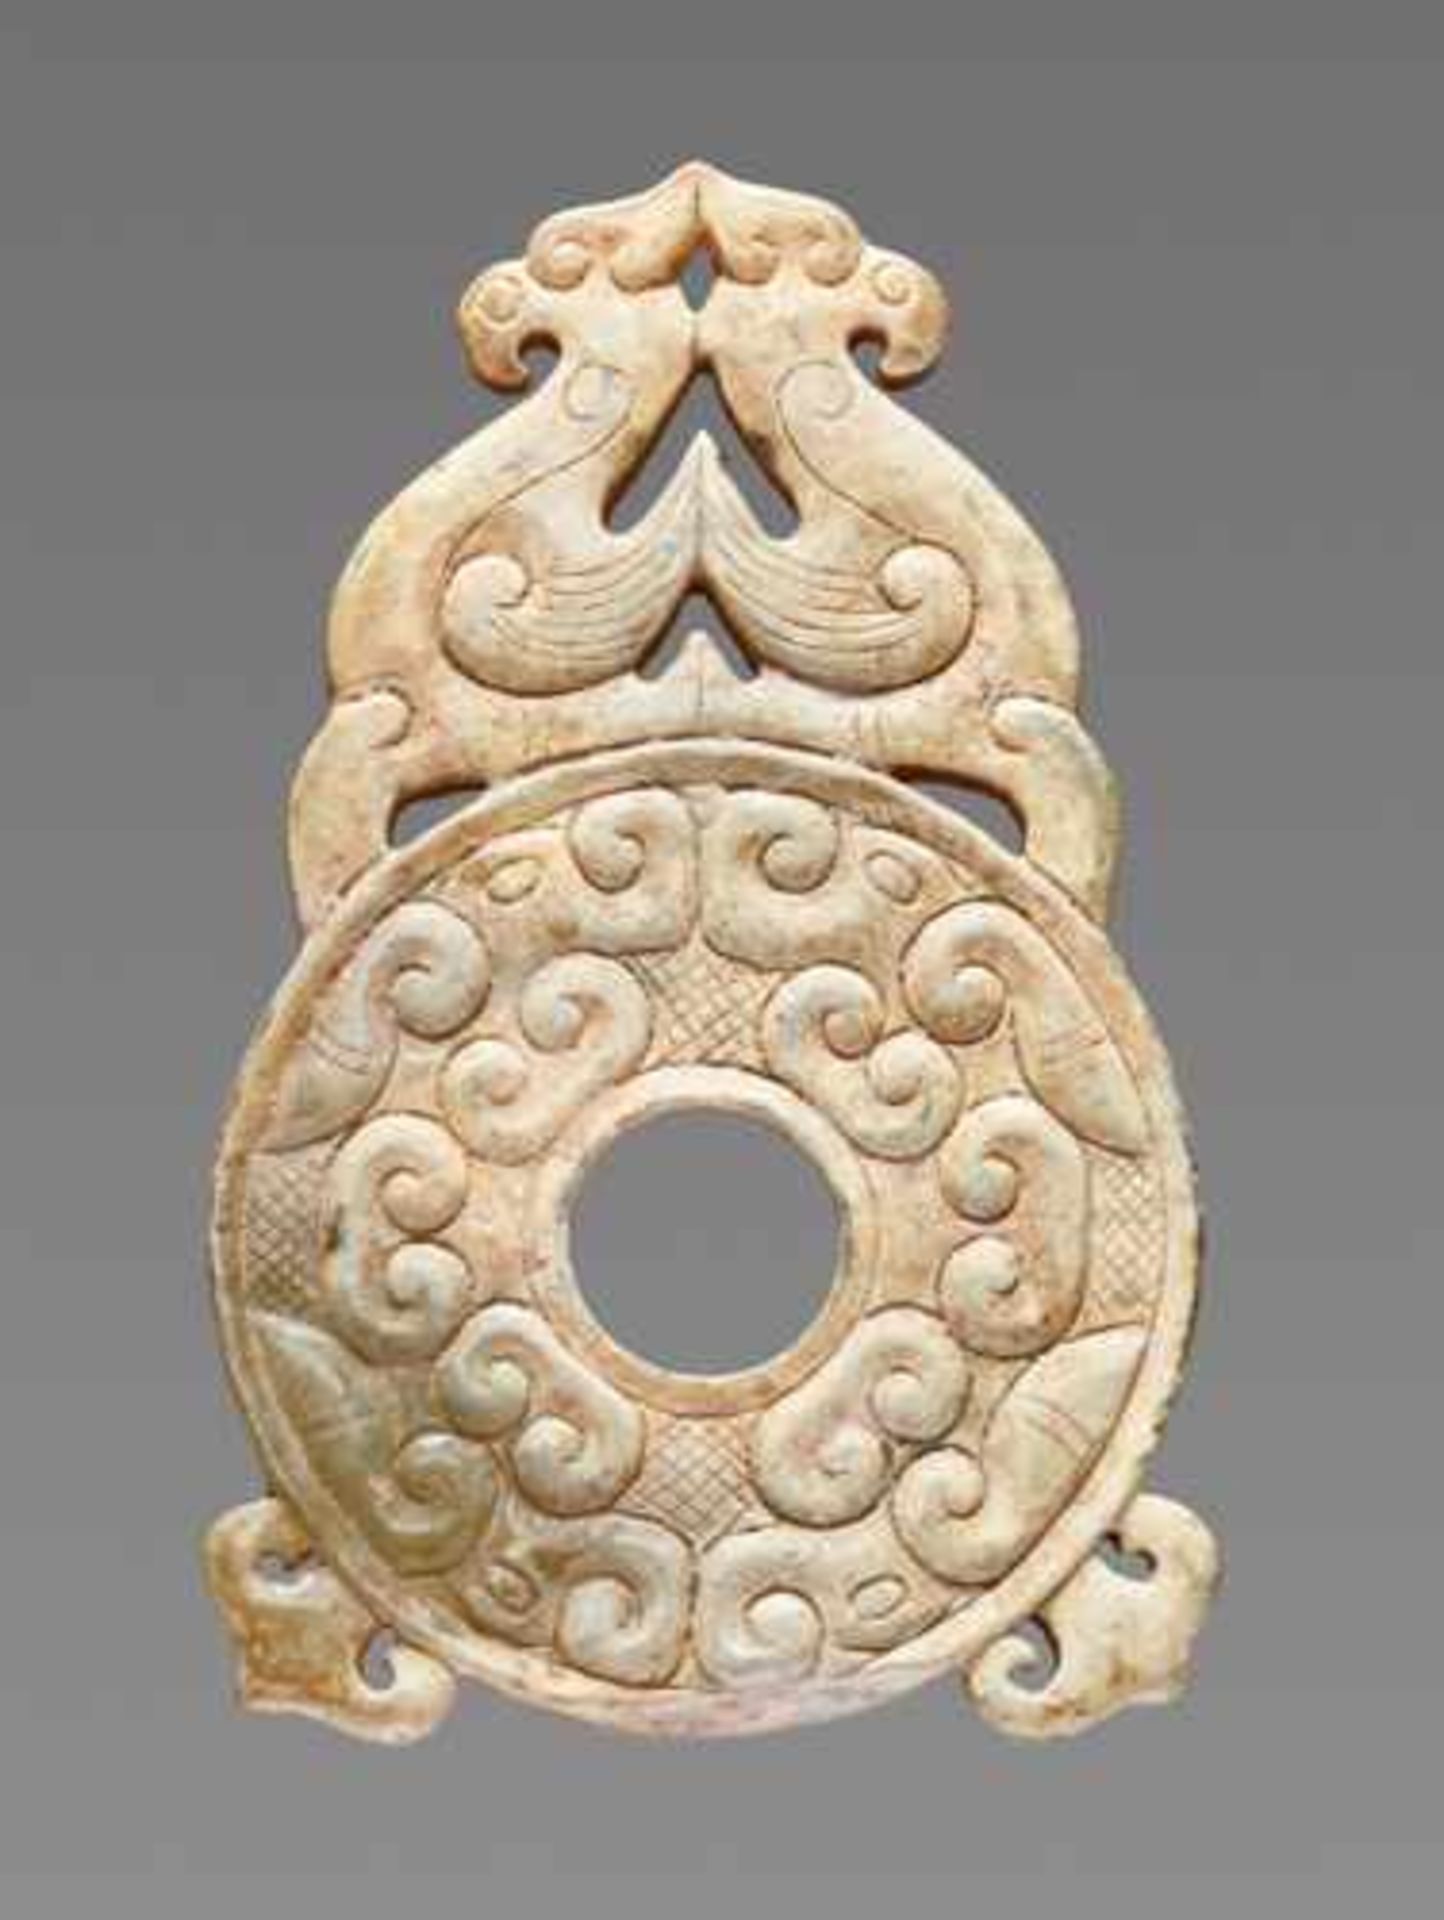 AN ATTRACTIVE SMALL DISC ORNAMENT EMBELLISHED WITH OPENWORK PHOENIXES ON TOP Jade, China. Eastern